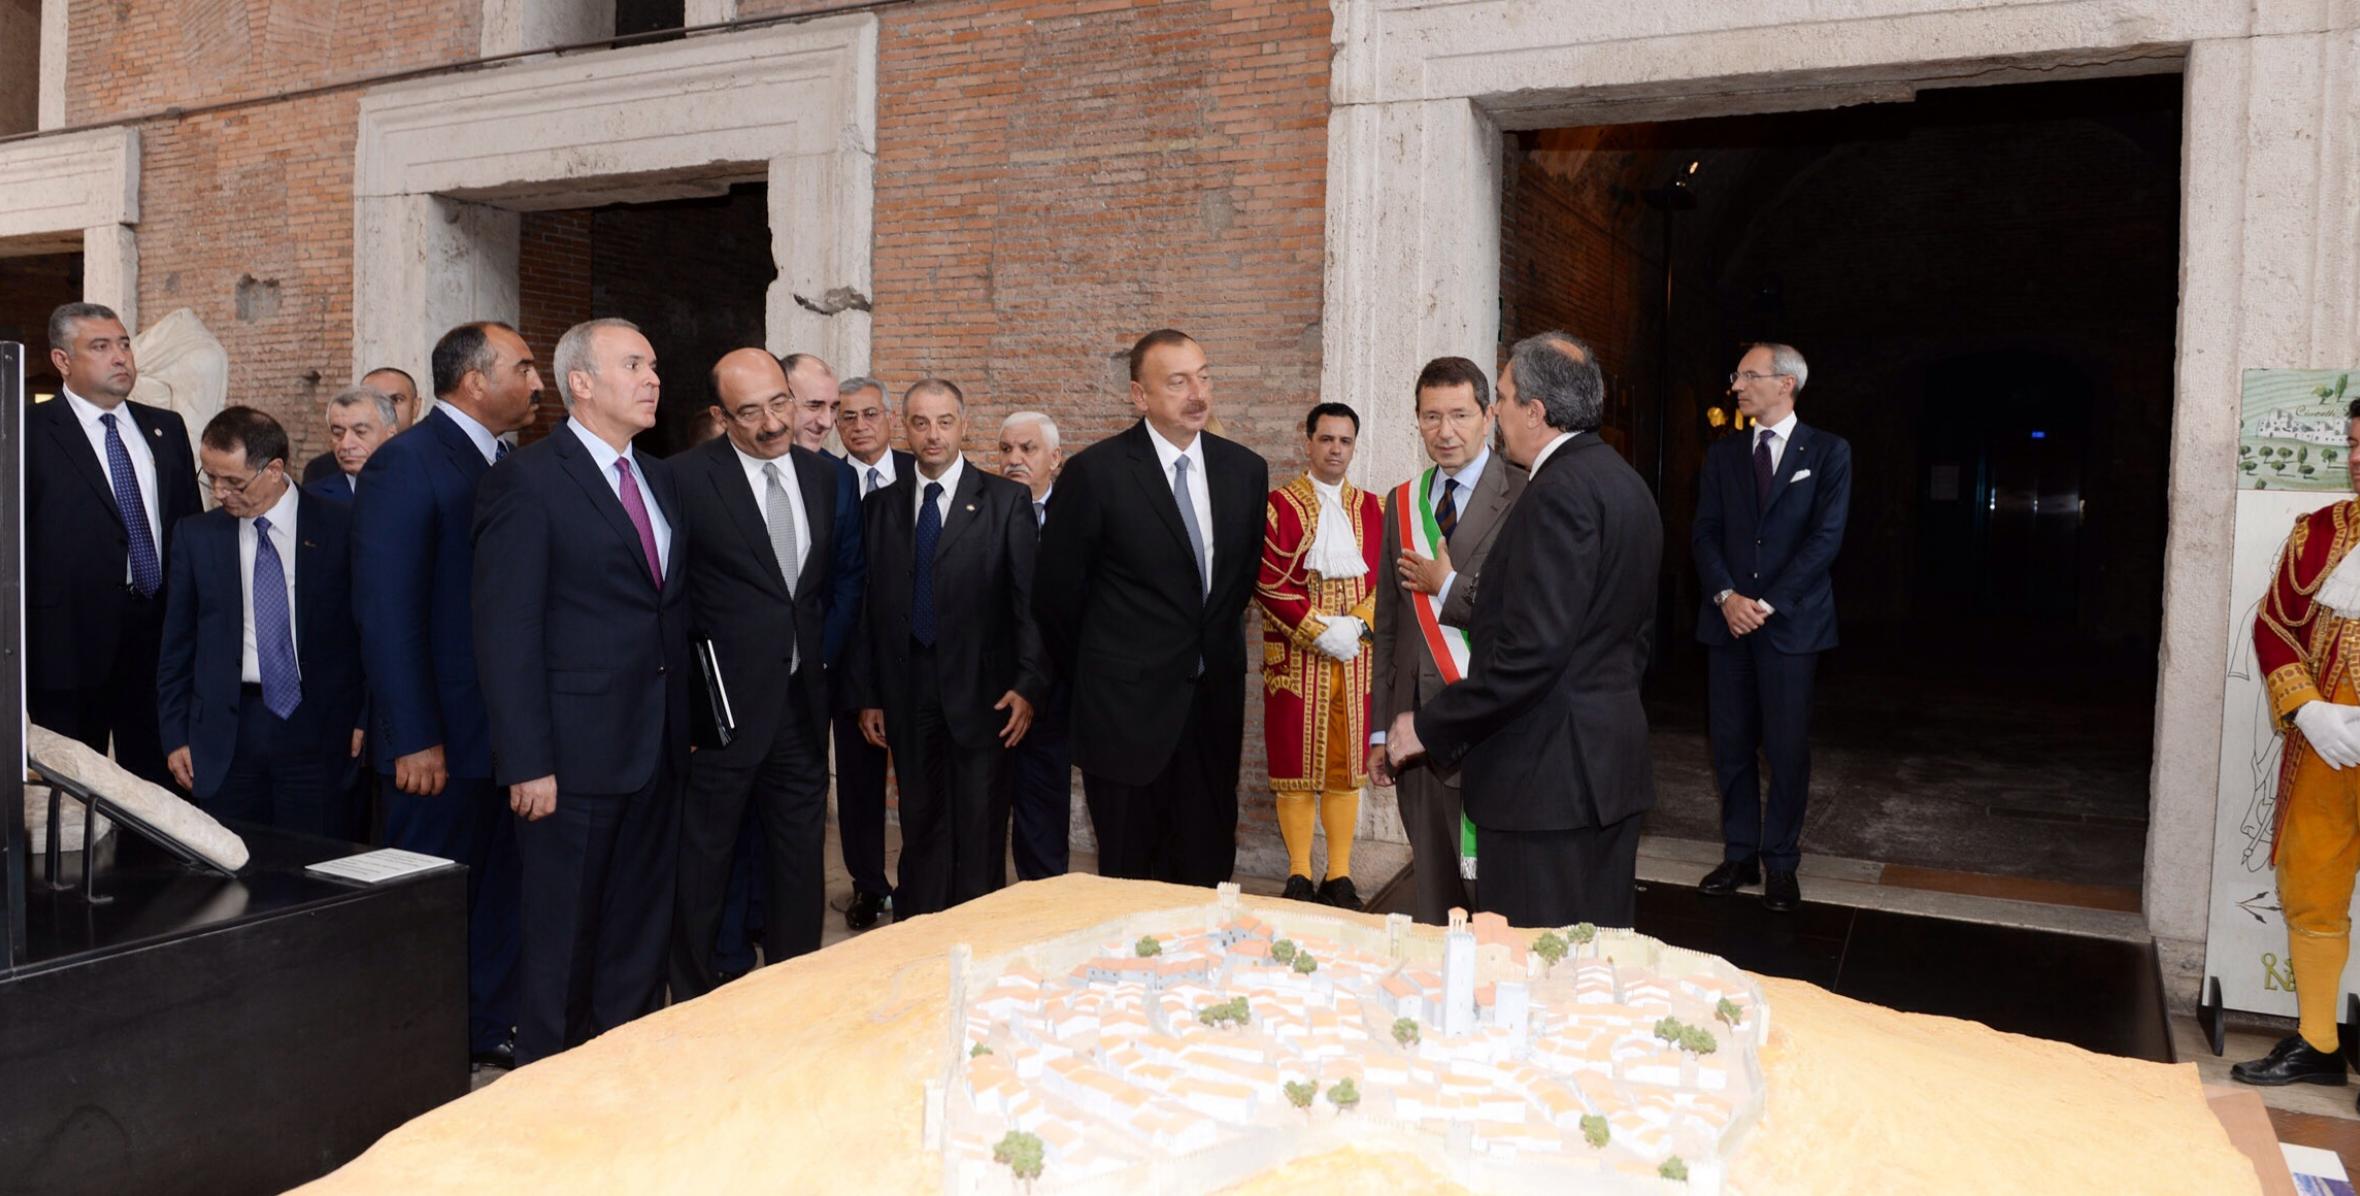 Ilham Aliyev visited the Mercati di Traiano museum in Rome where he met with Mayor Ignazio Marino and answered questions from Italian journalists